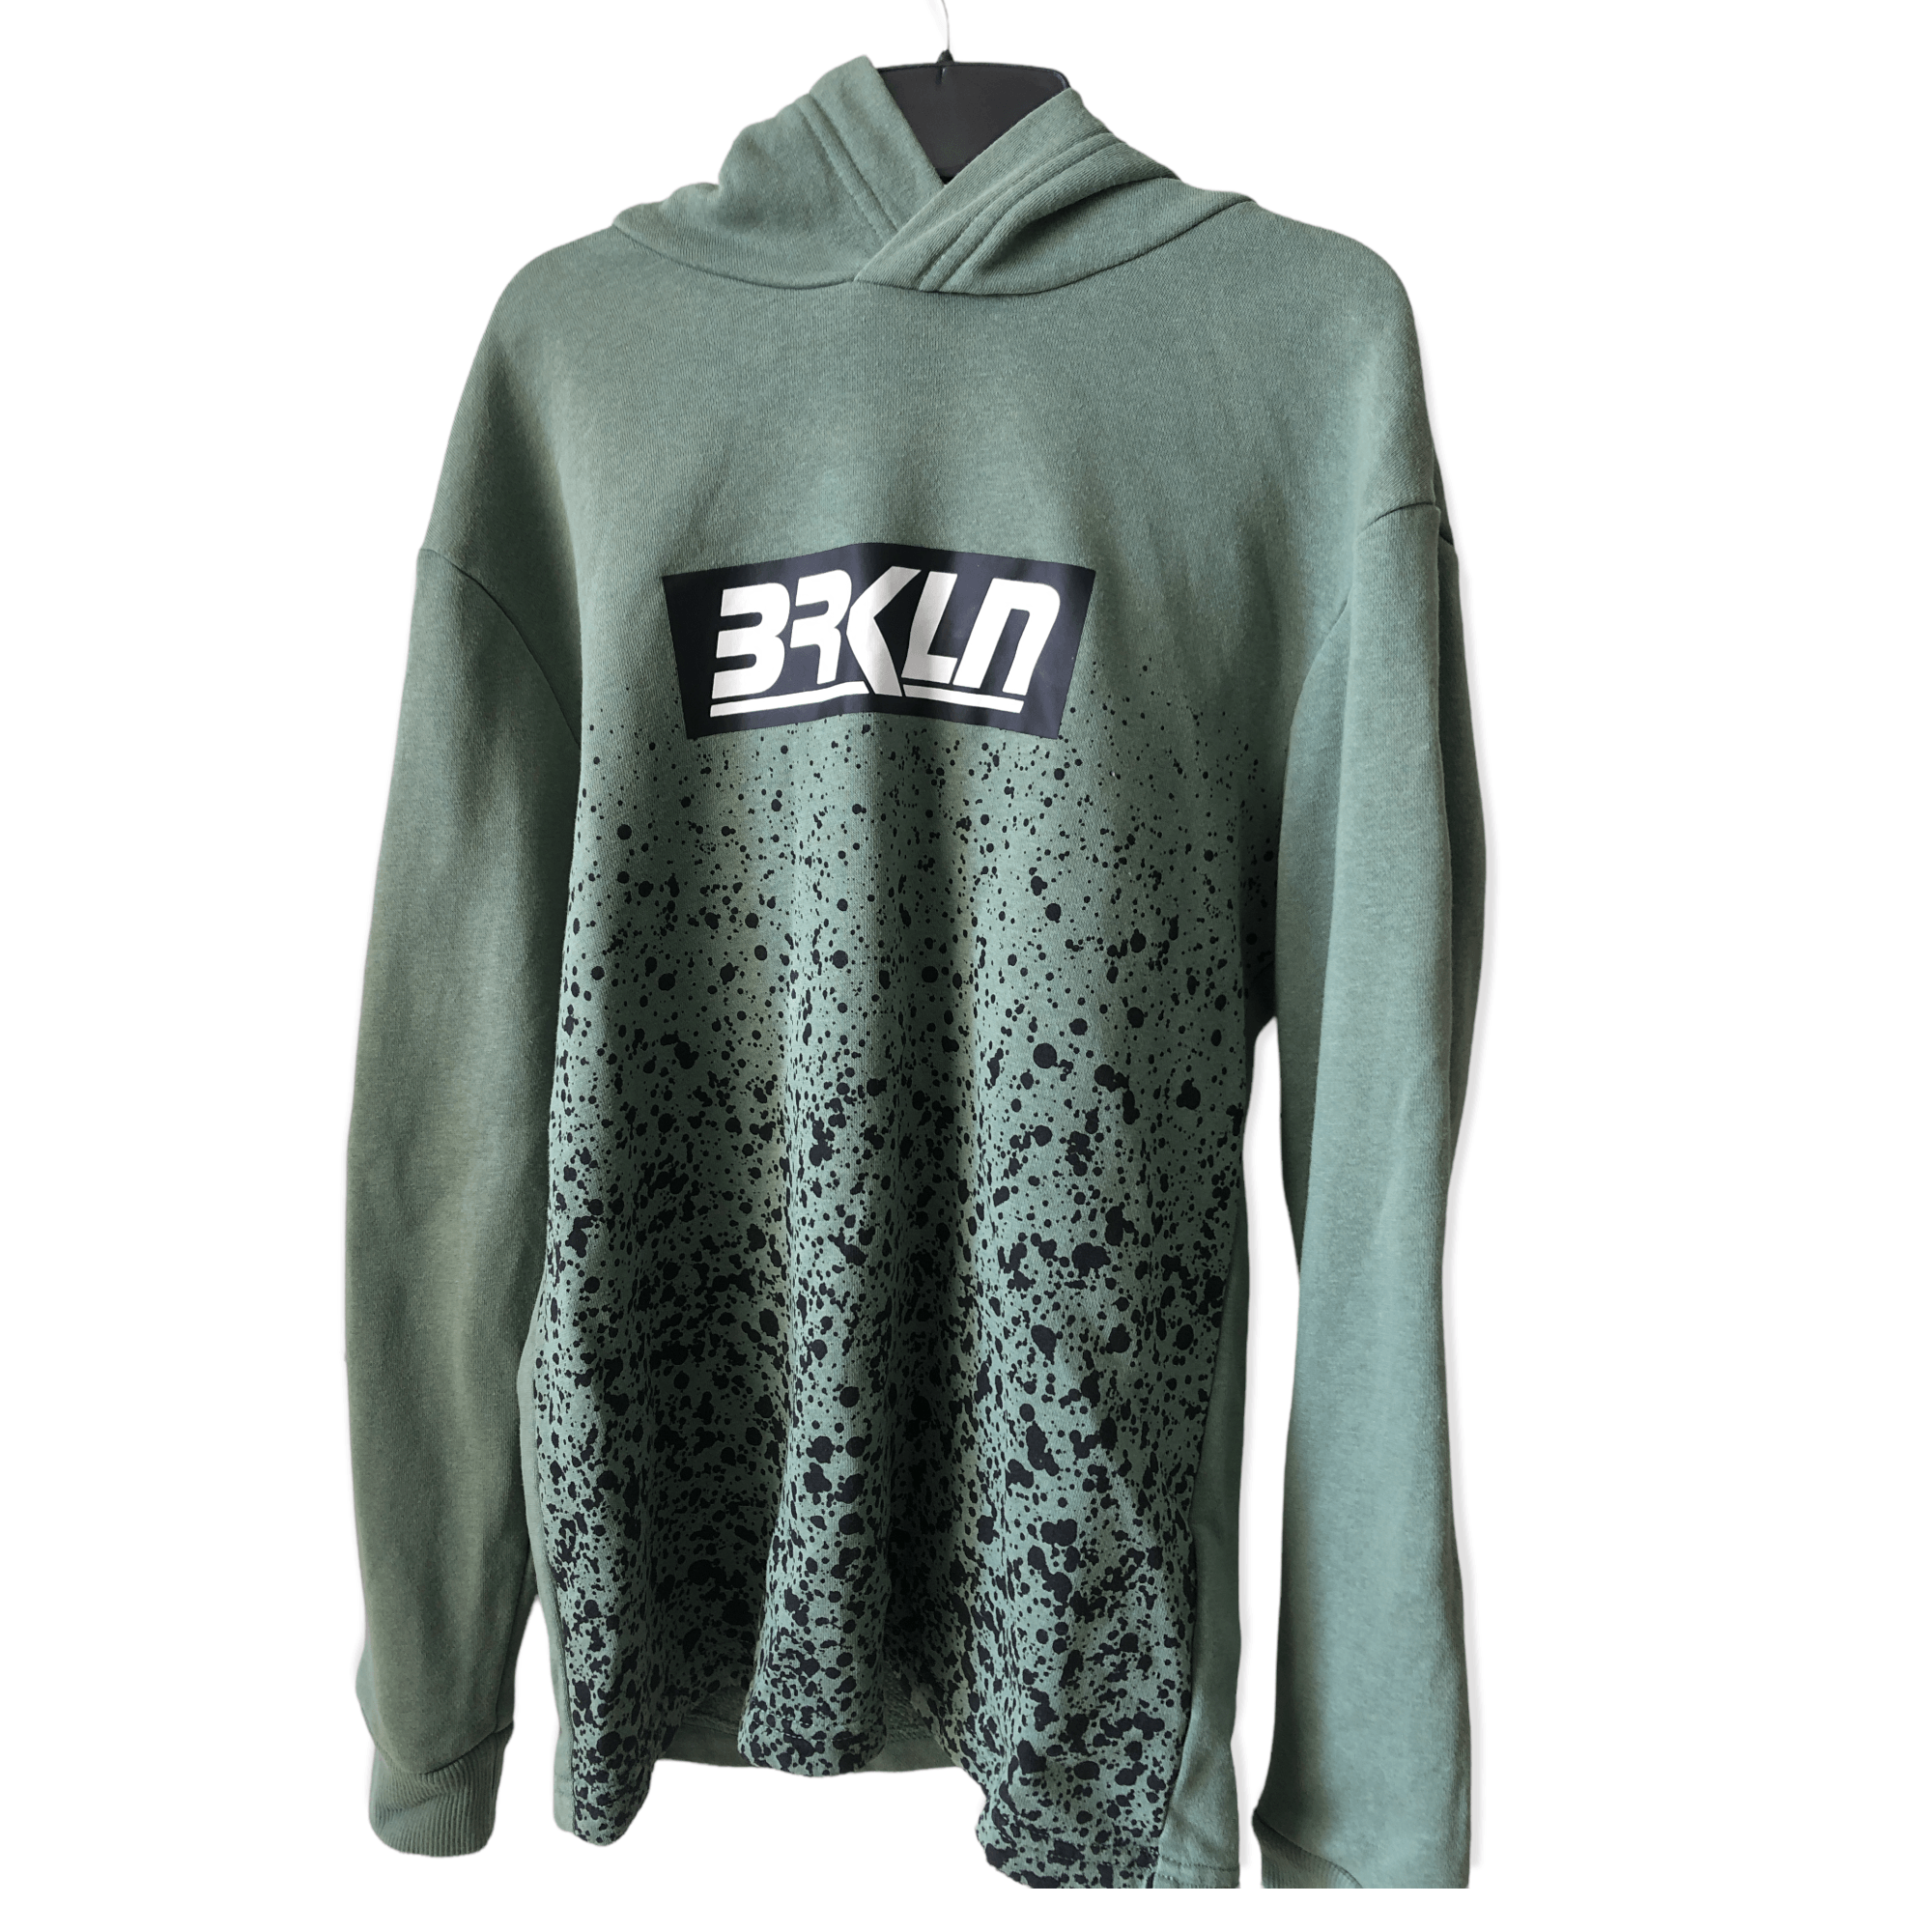 Pre-Owned H&M Hoodie BRKLN  on front (Ages 9-10) The Re-Generation